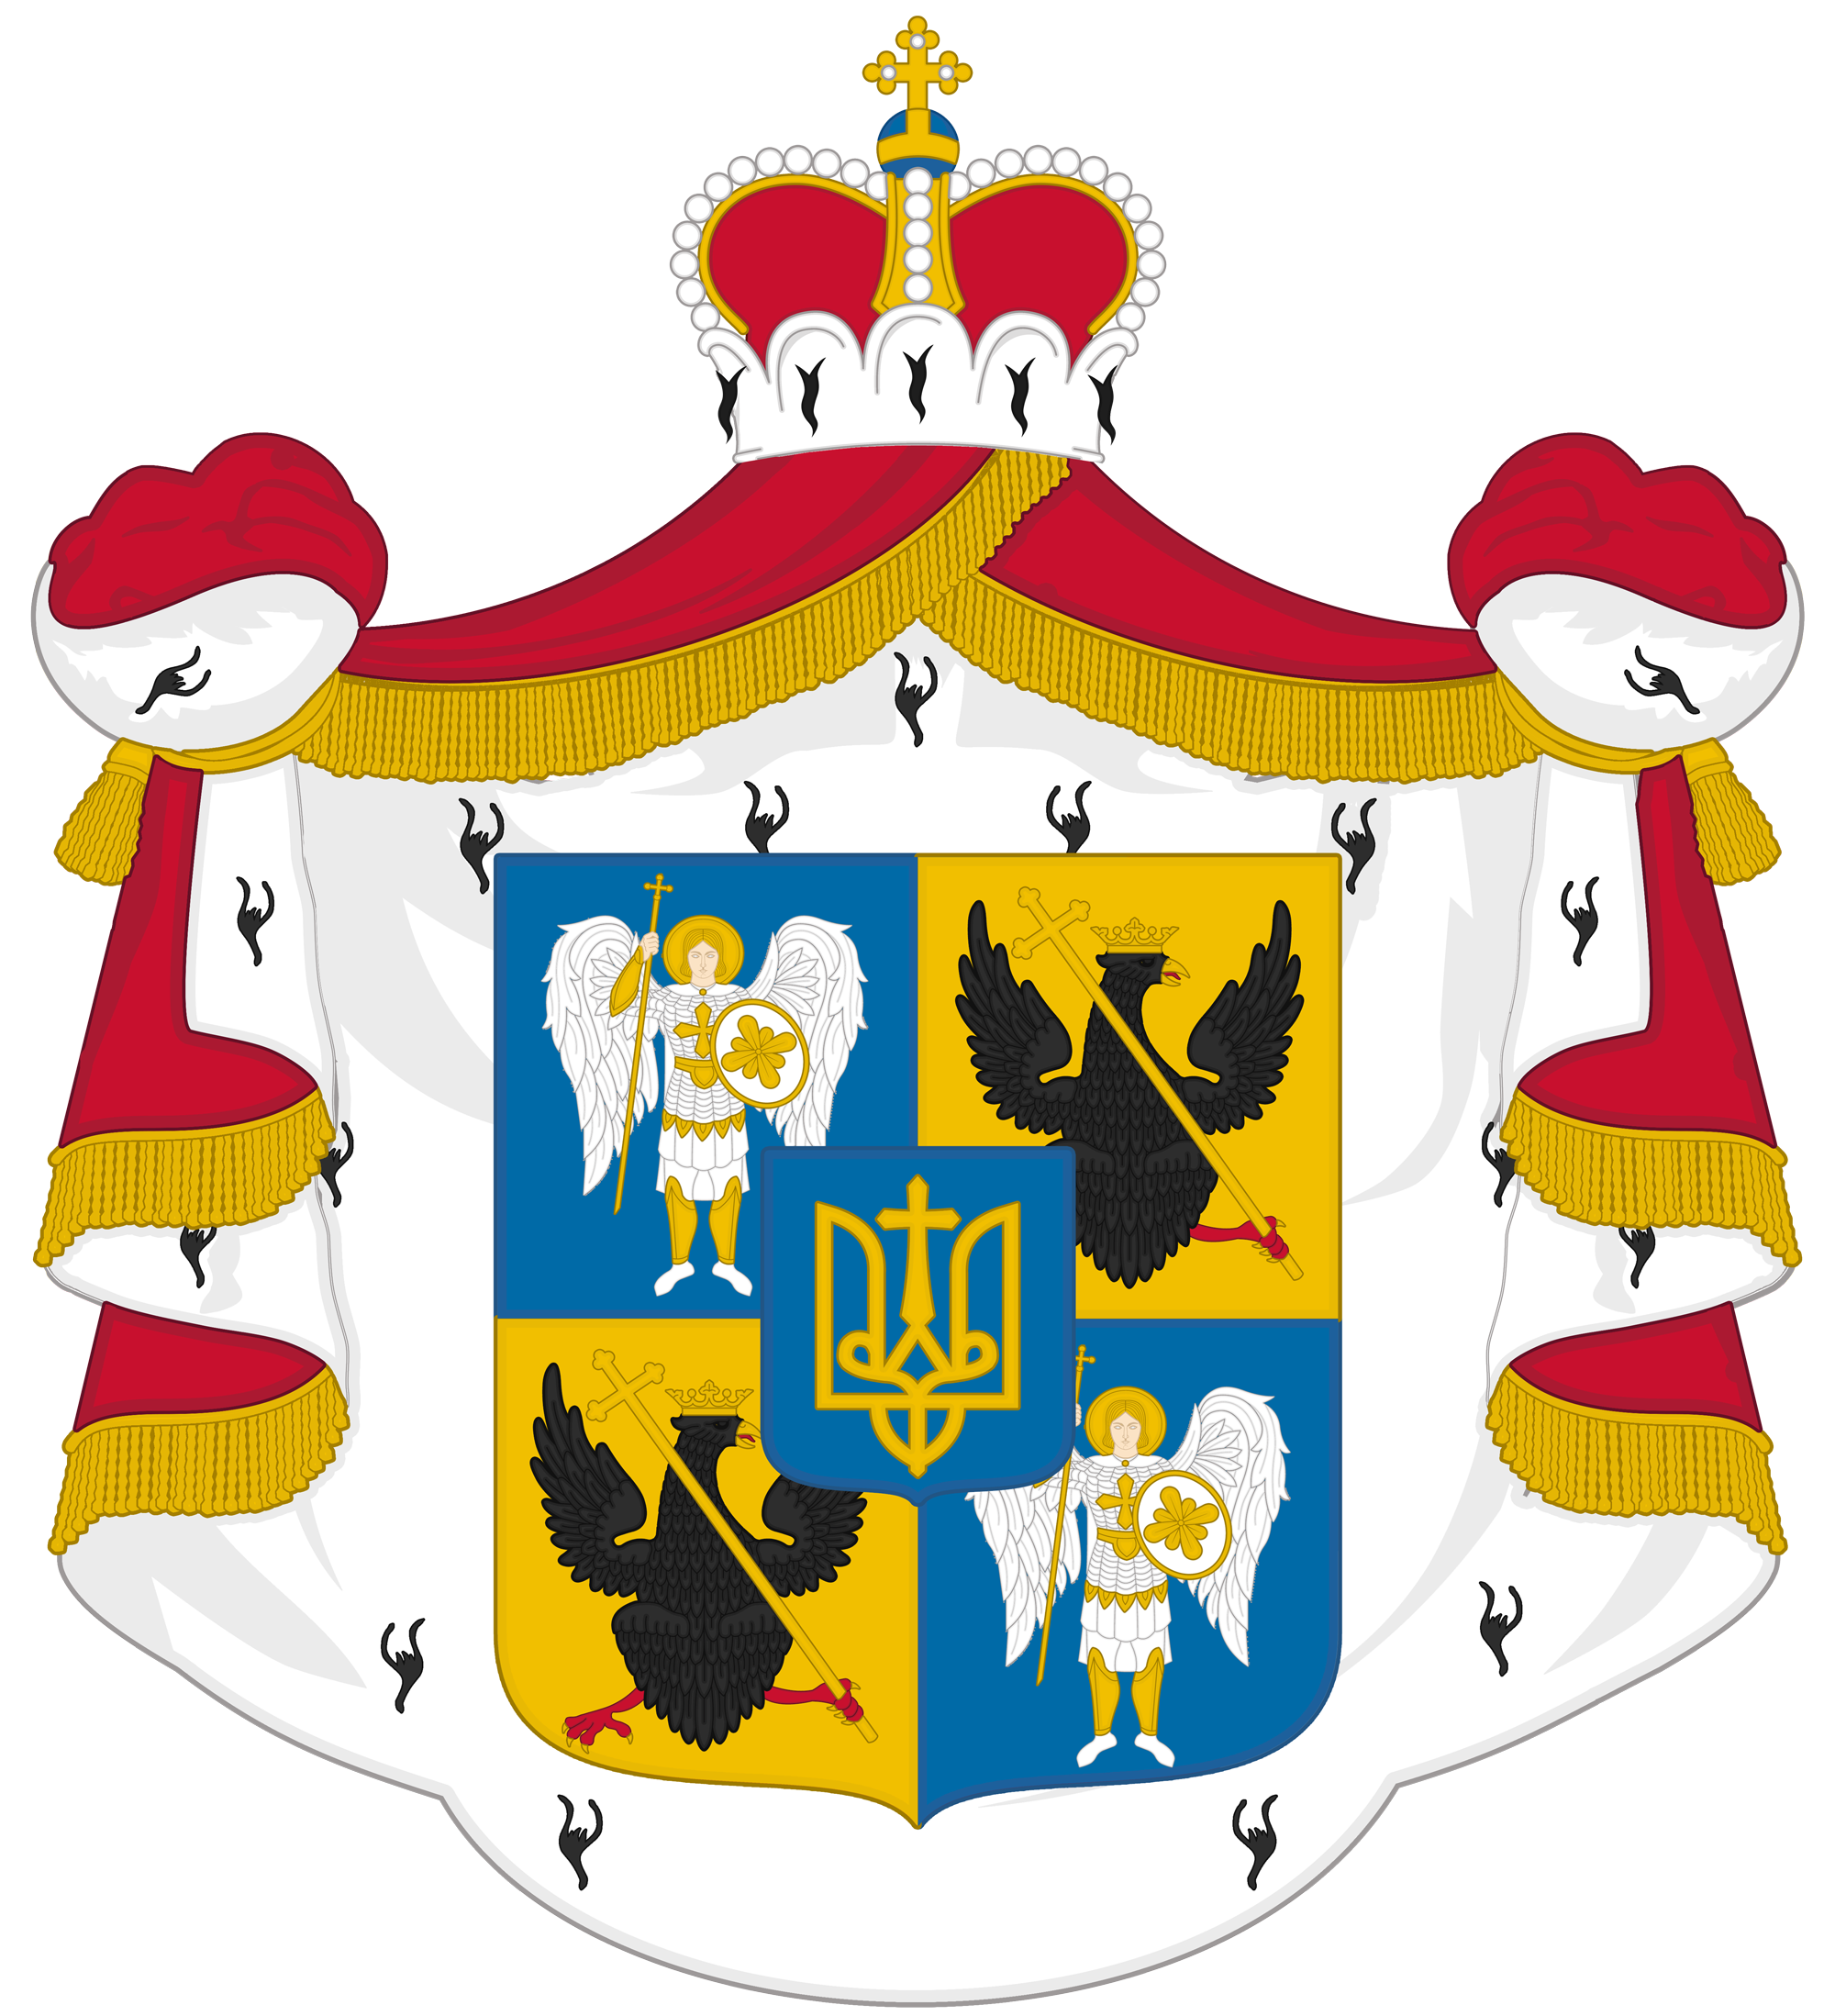 Coat of Arms of the Ukrainian Royal Family